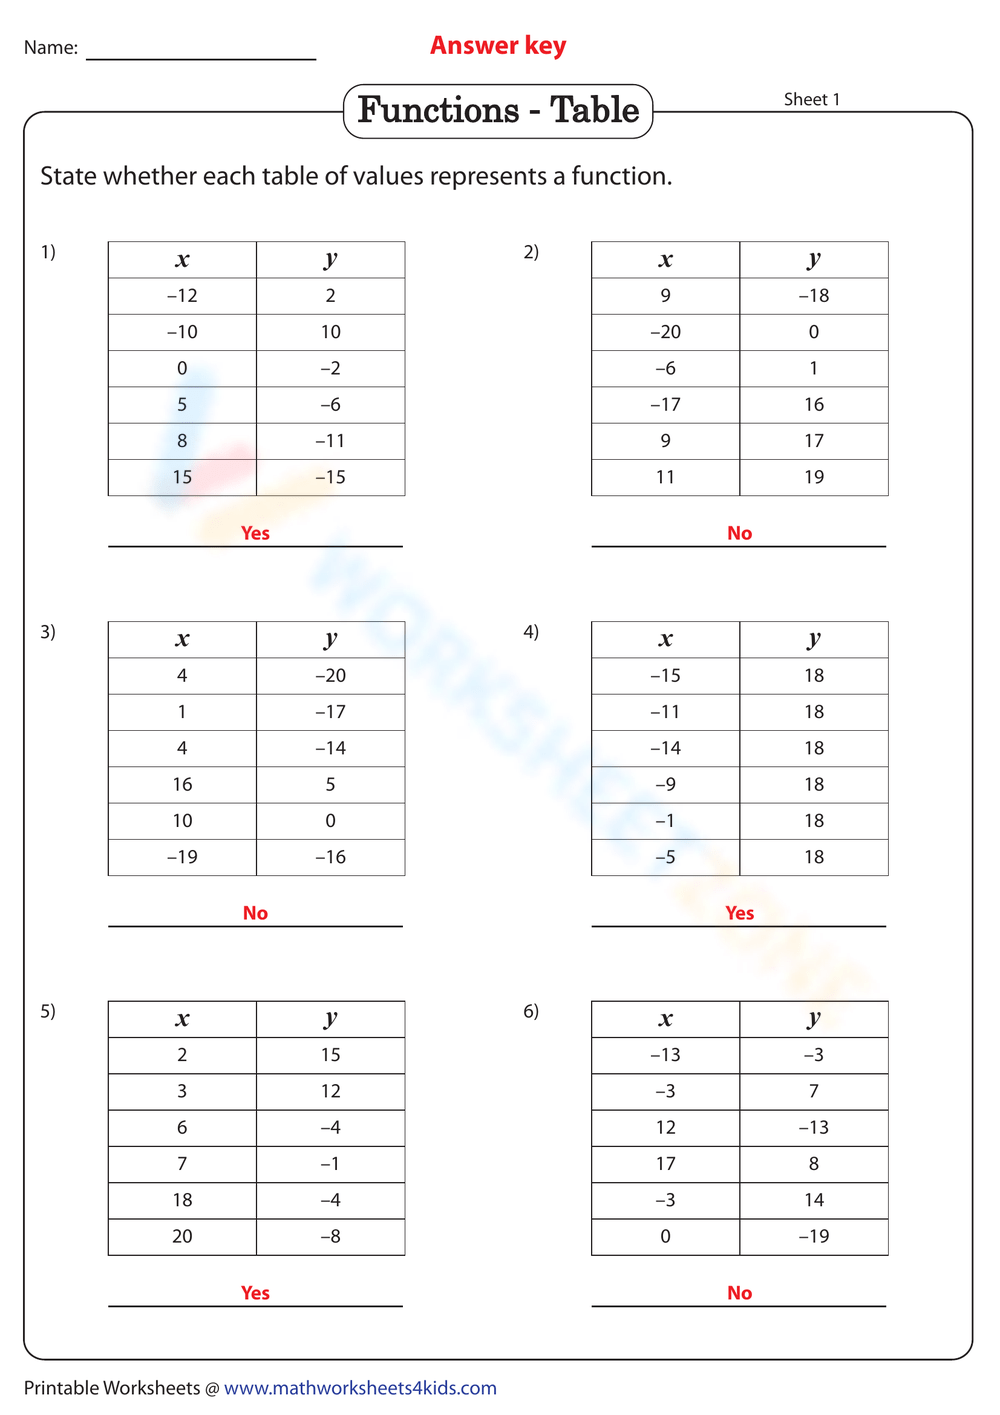 Functions - Table